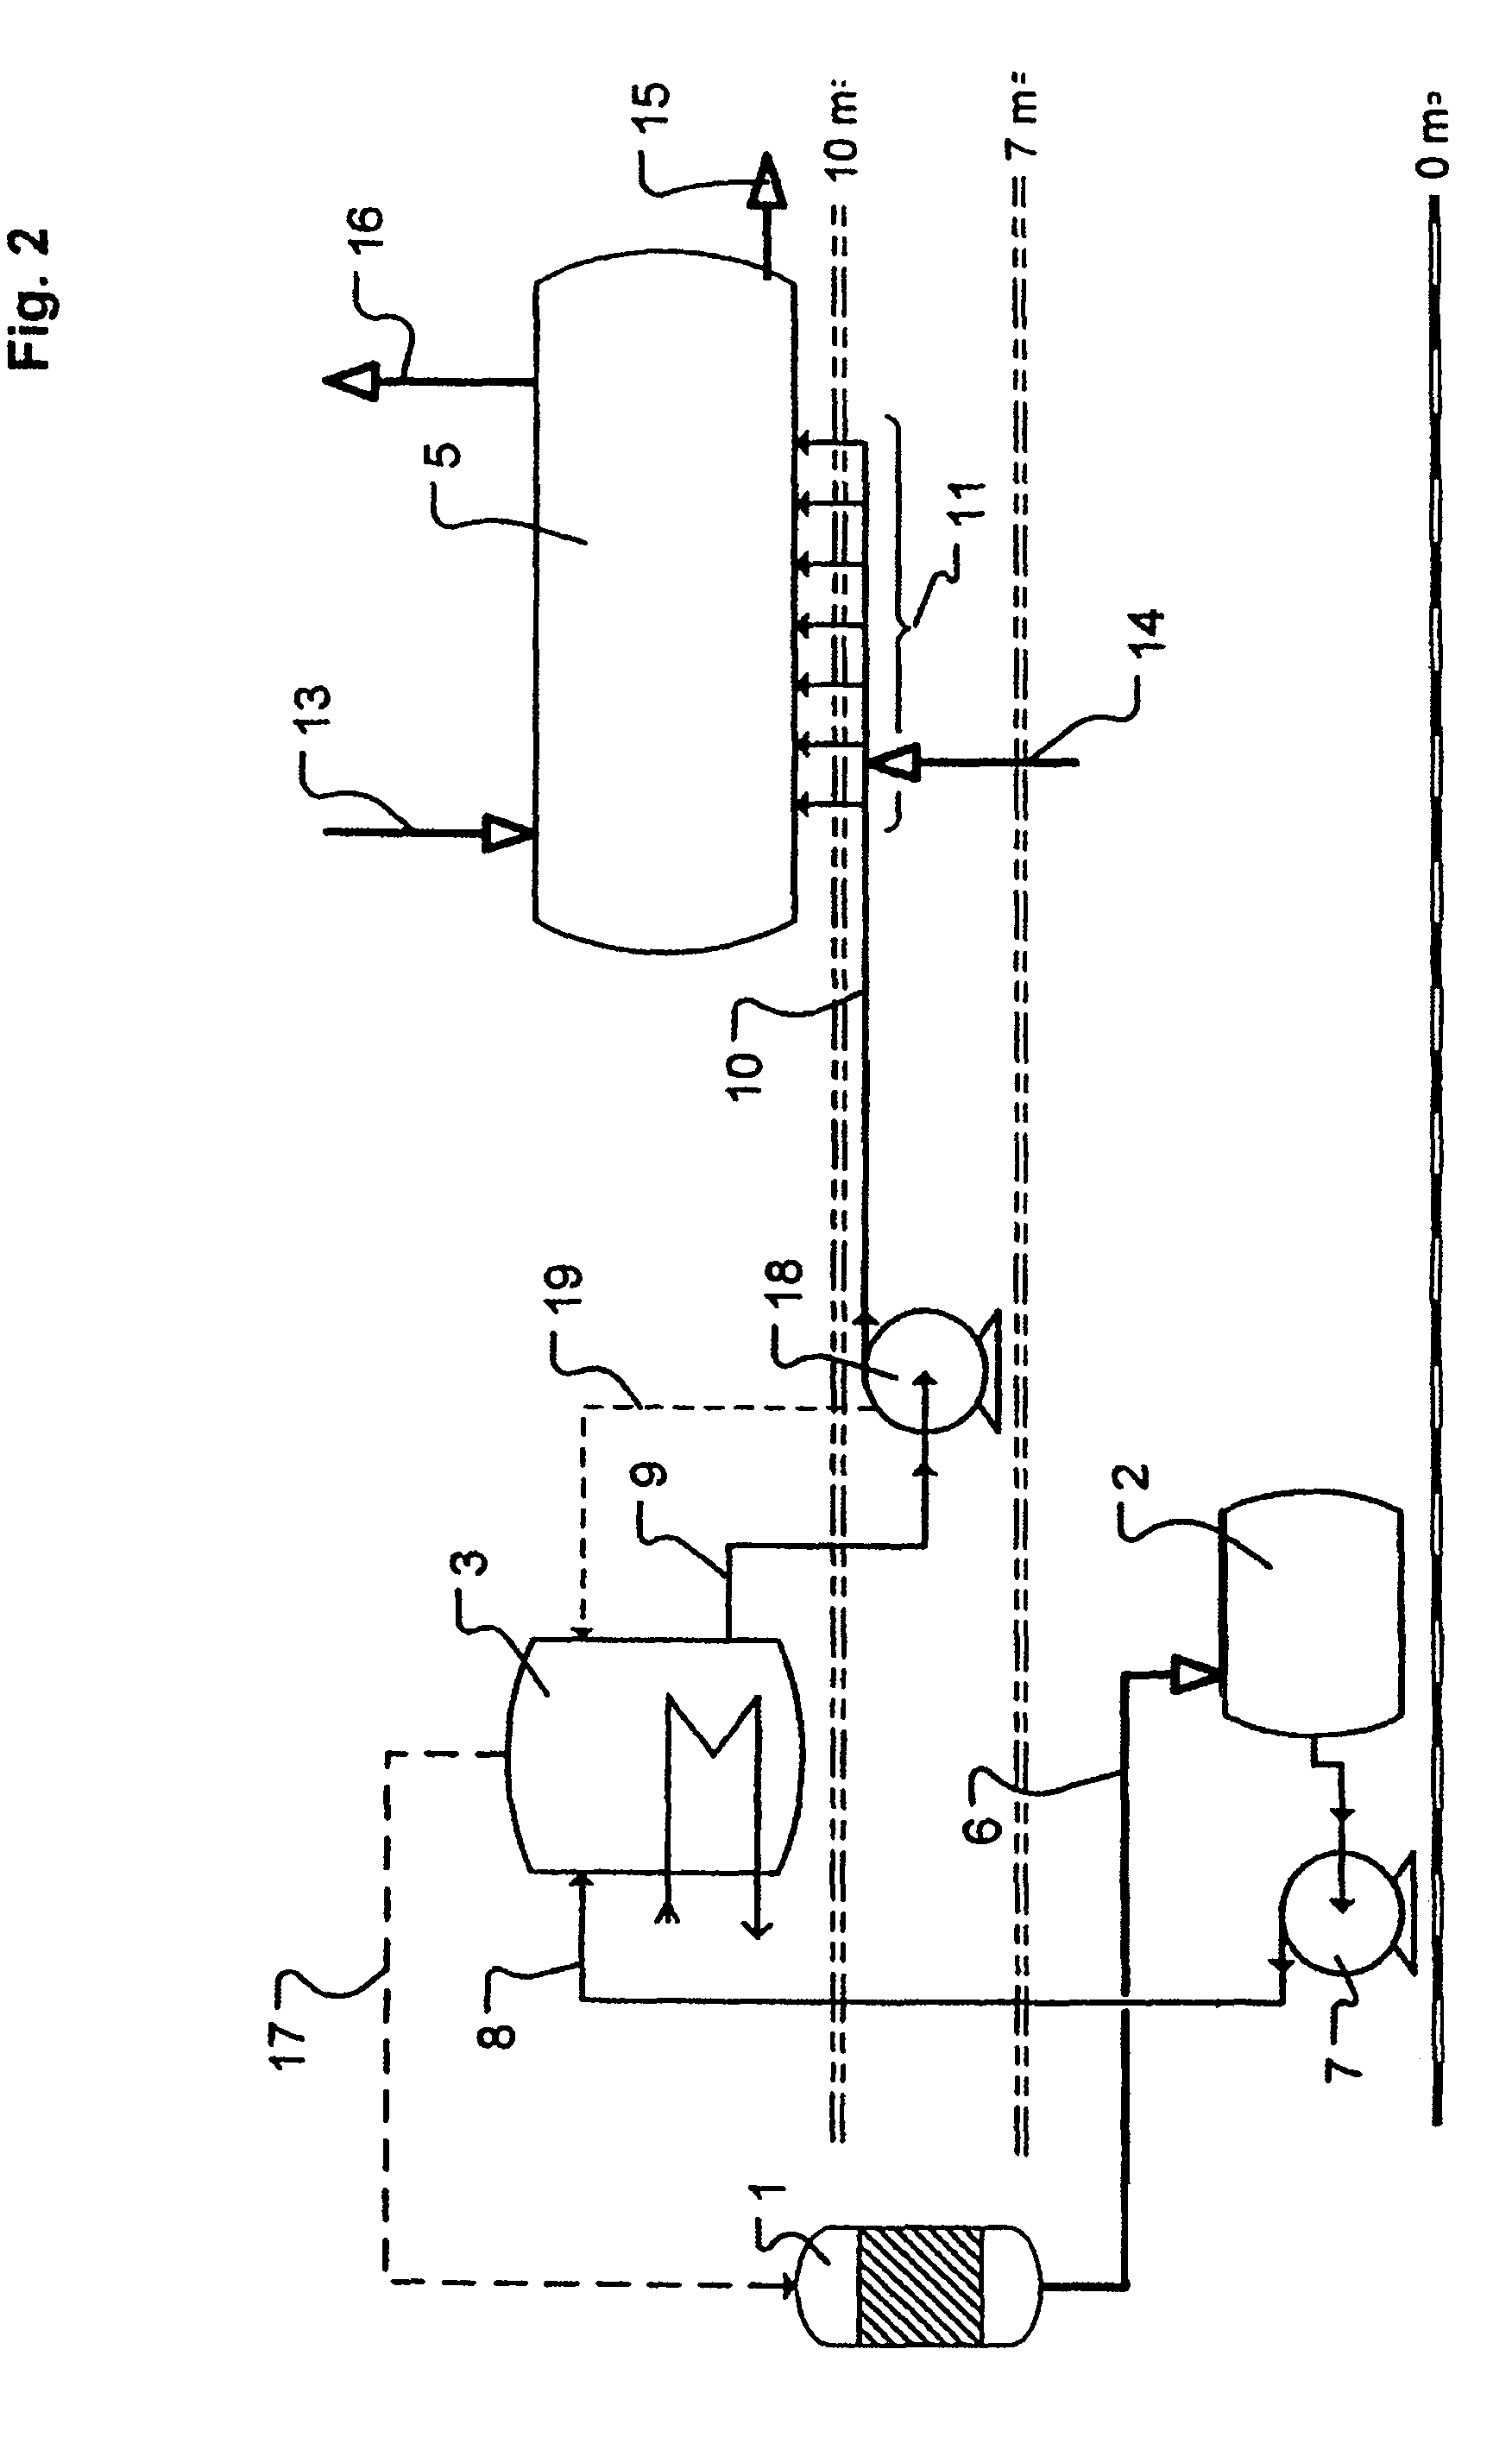 Reduction of biuret and free ammonia during a method for producing fertilizer granulates containing urea